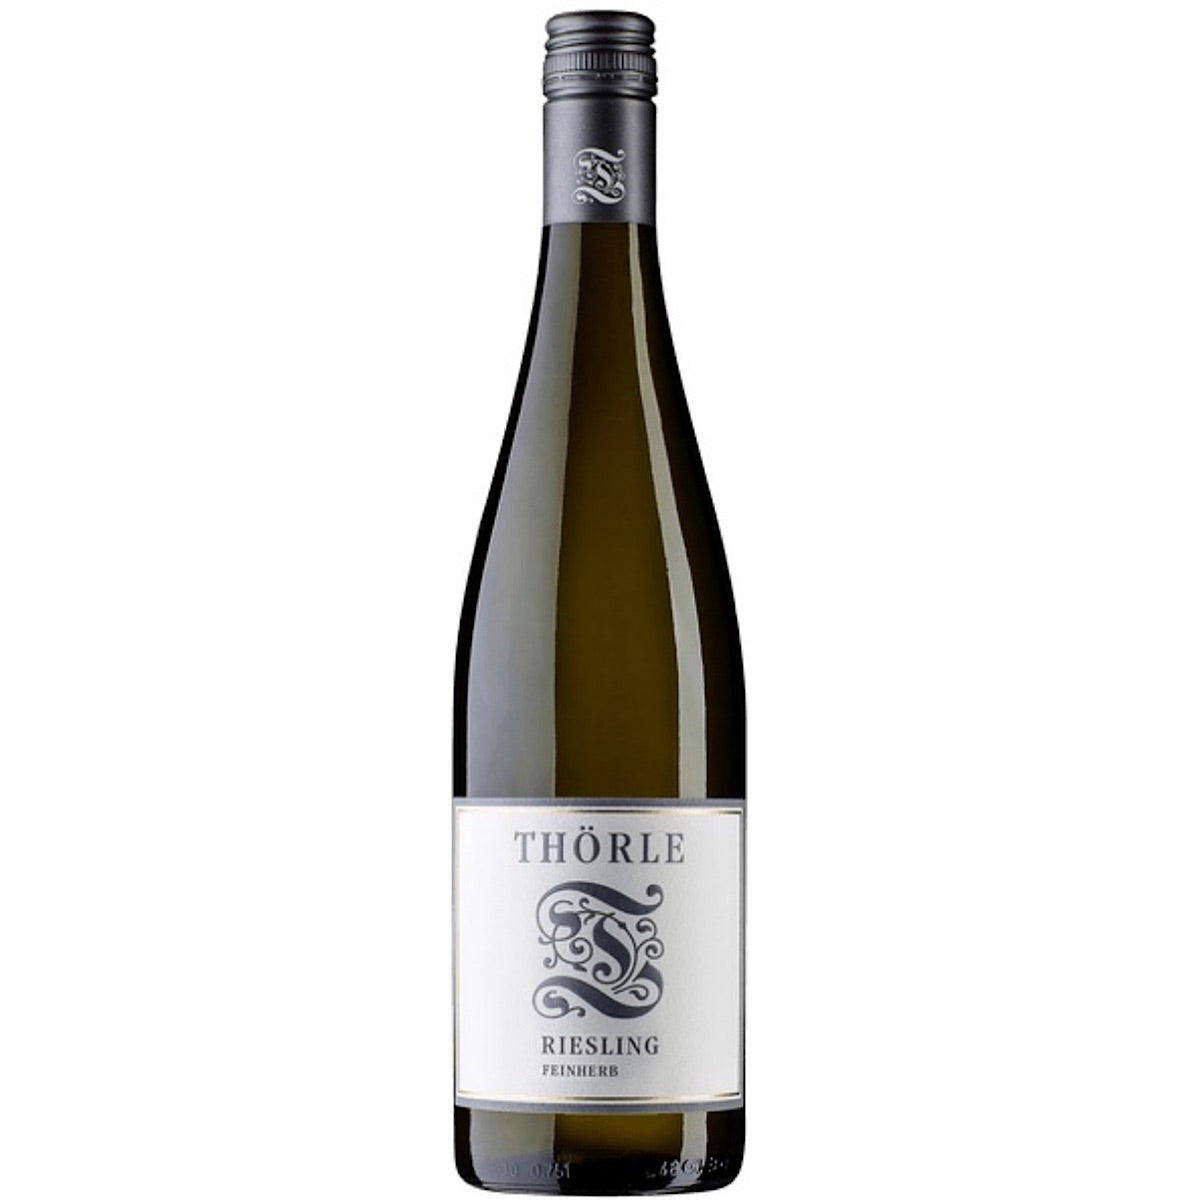 Thorle, Riesling Feinherb, 6 Bottle Case, 75cl